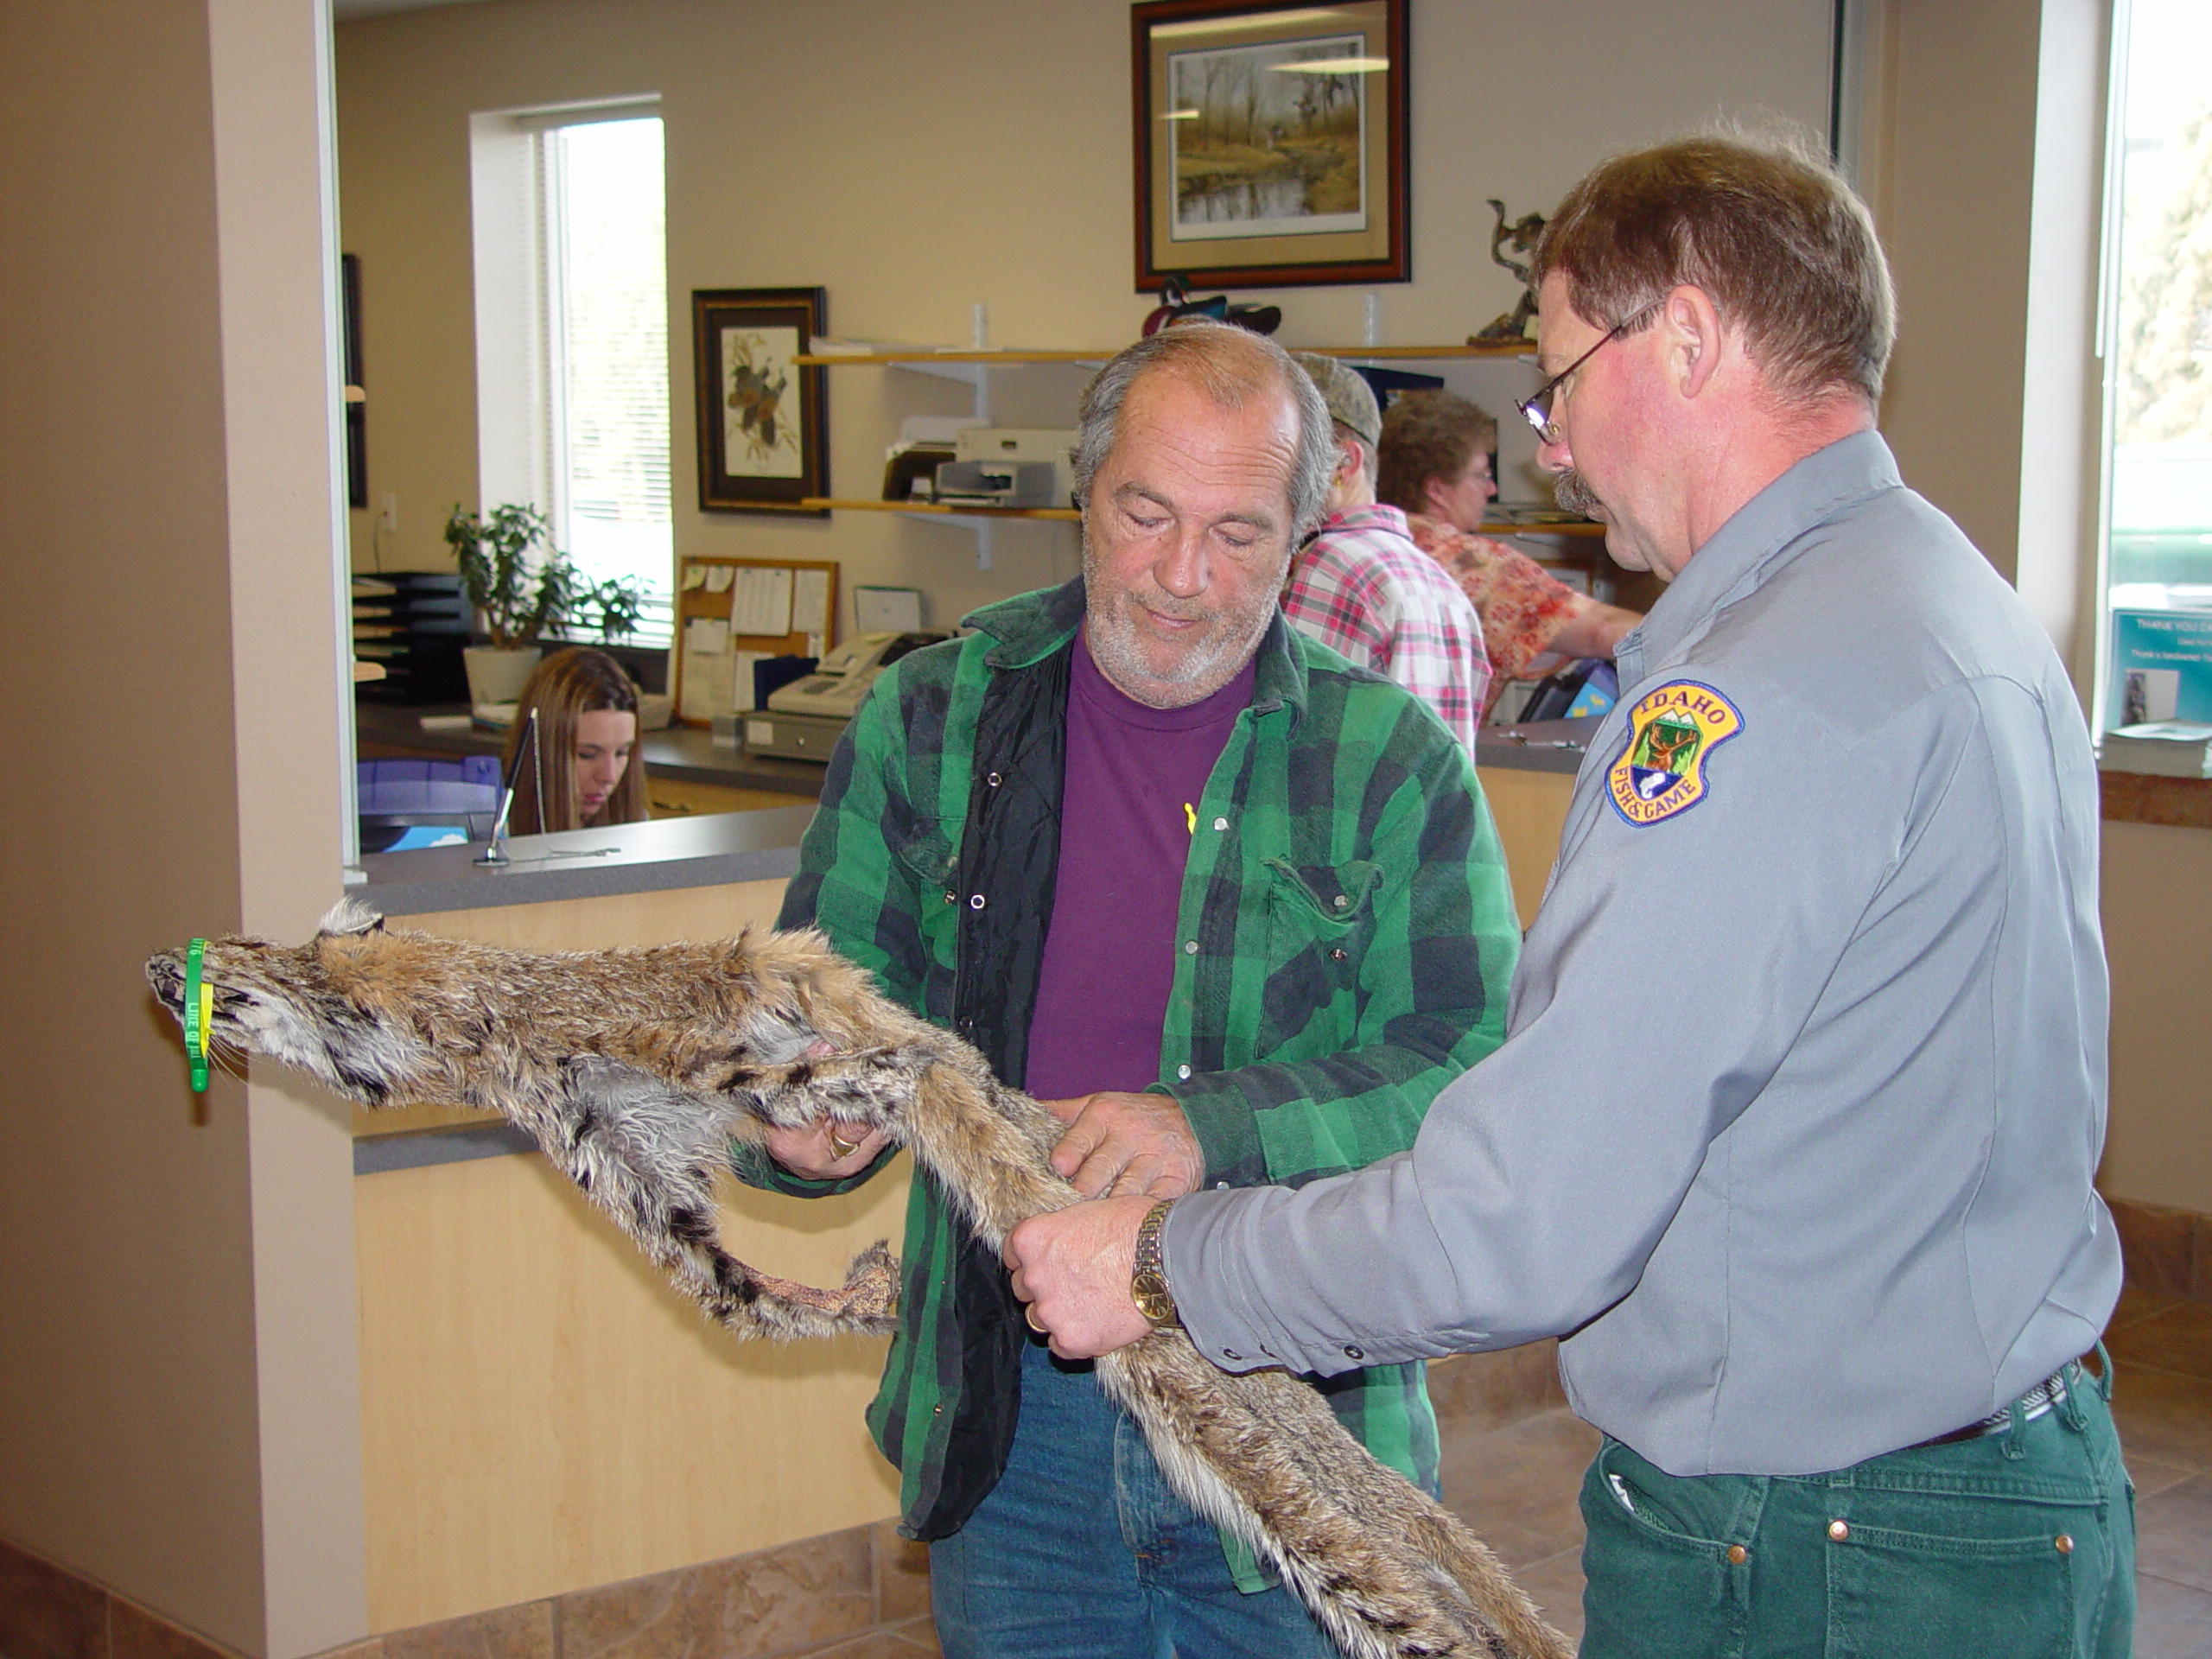 an IDFG conservation officer and another man look over bobcat skins for a report February 2006